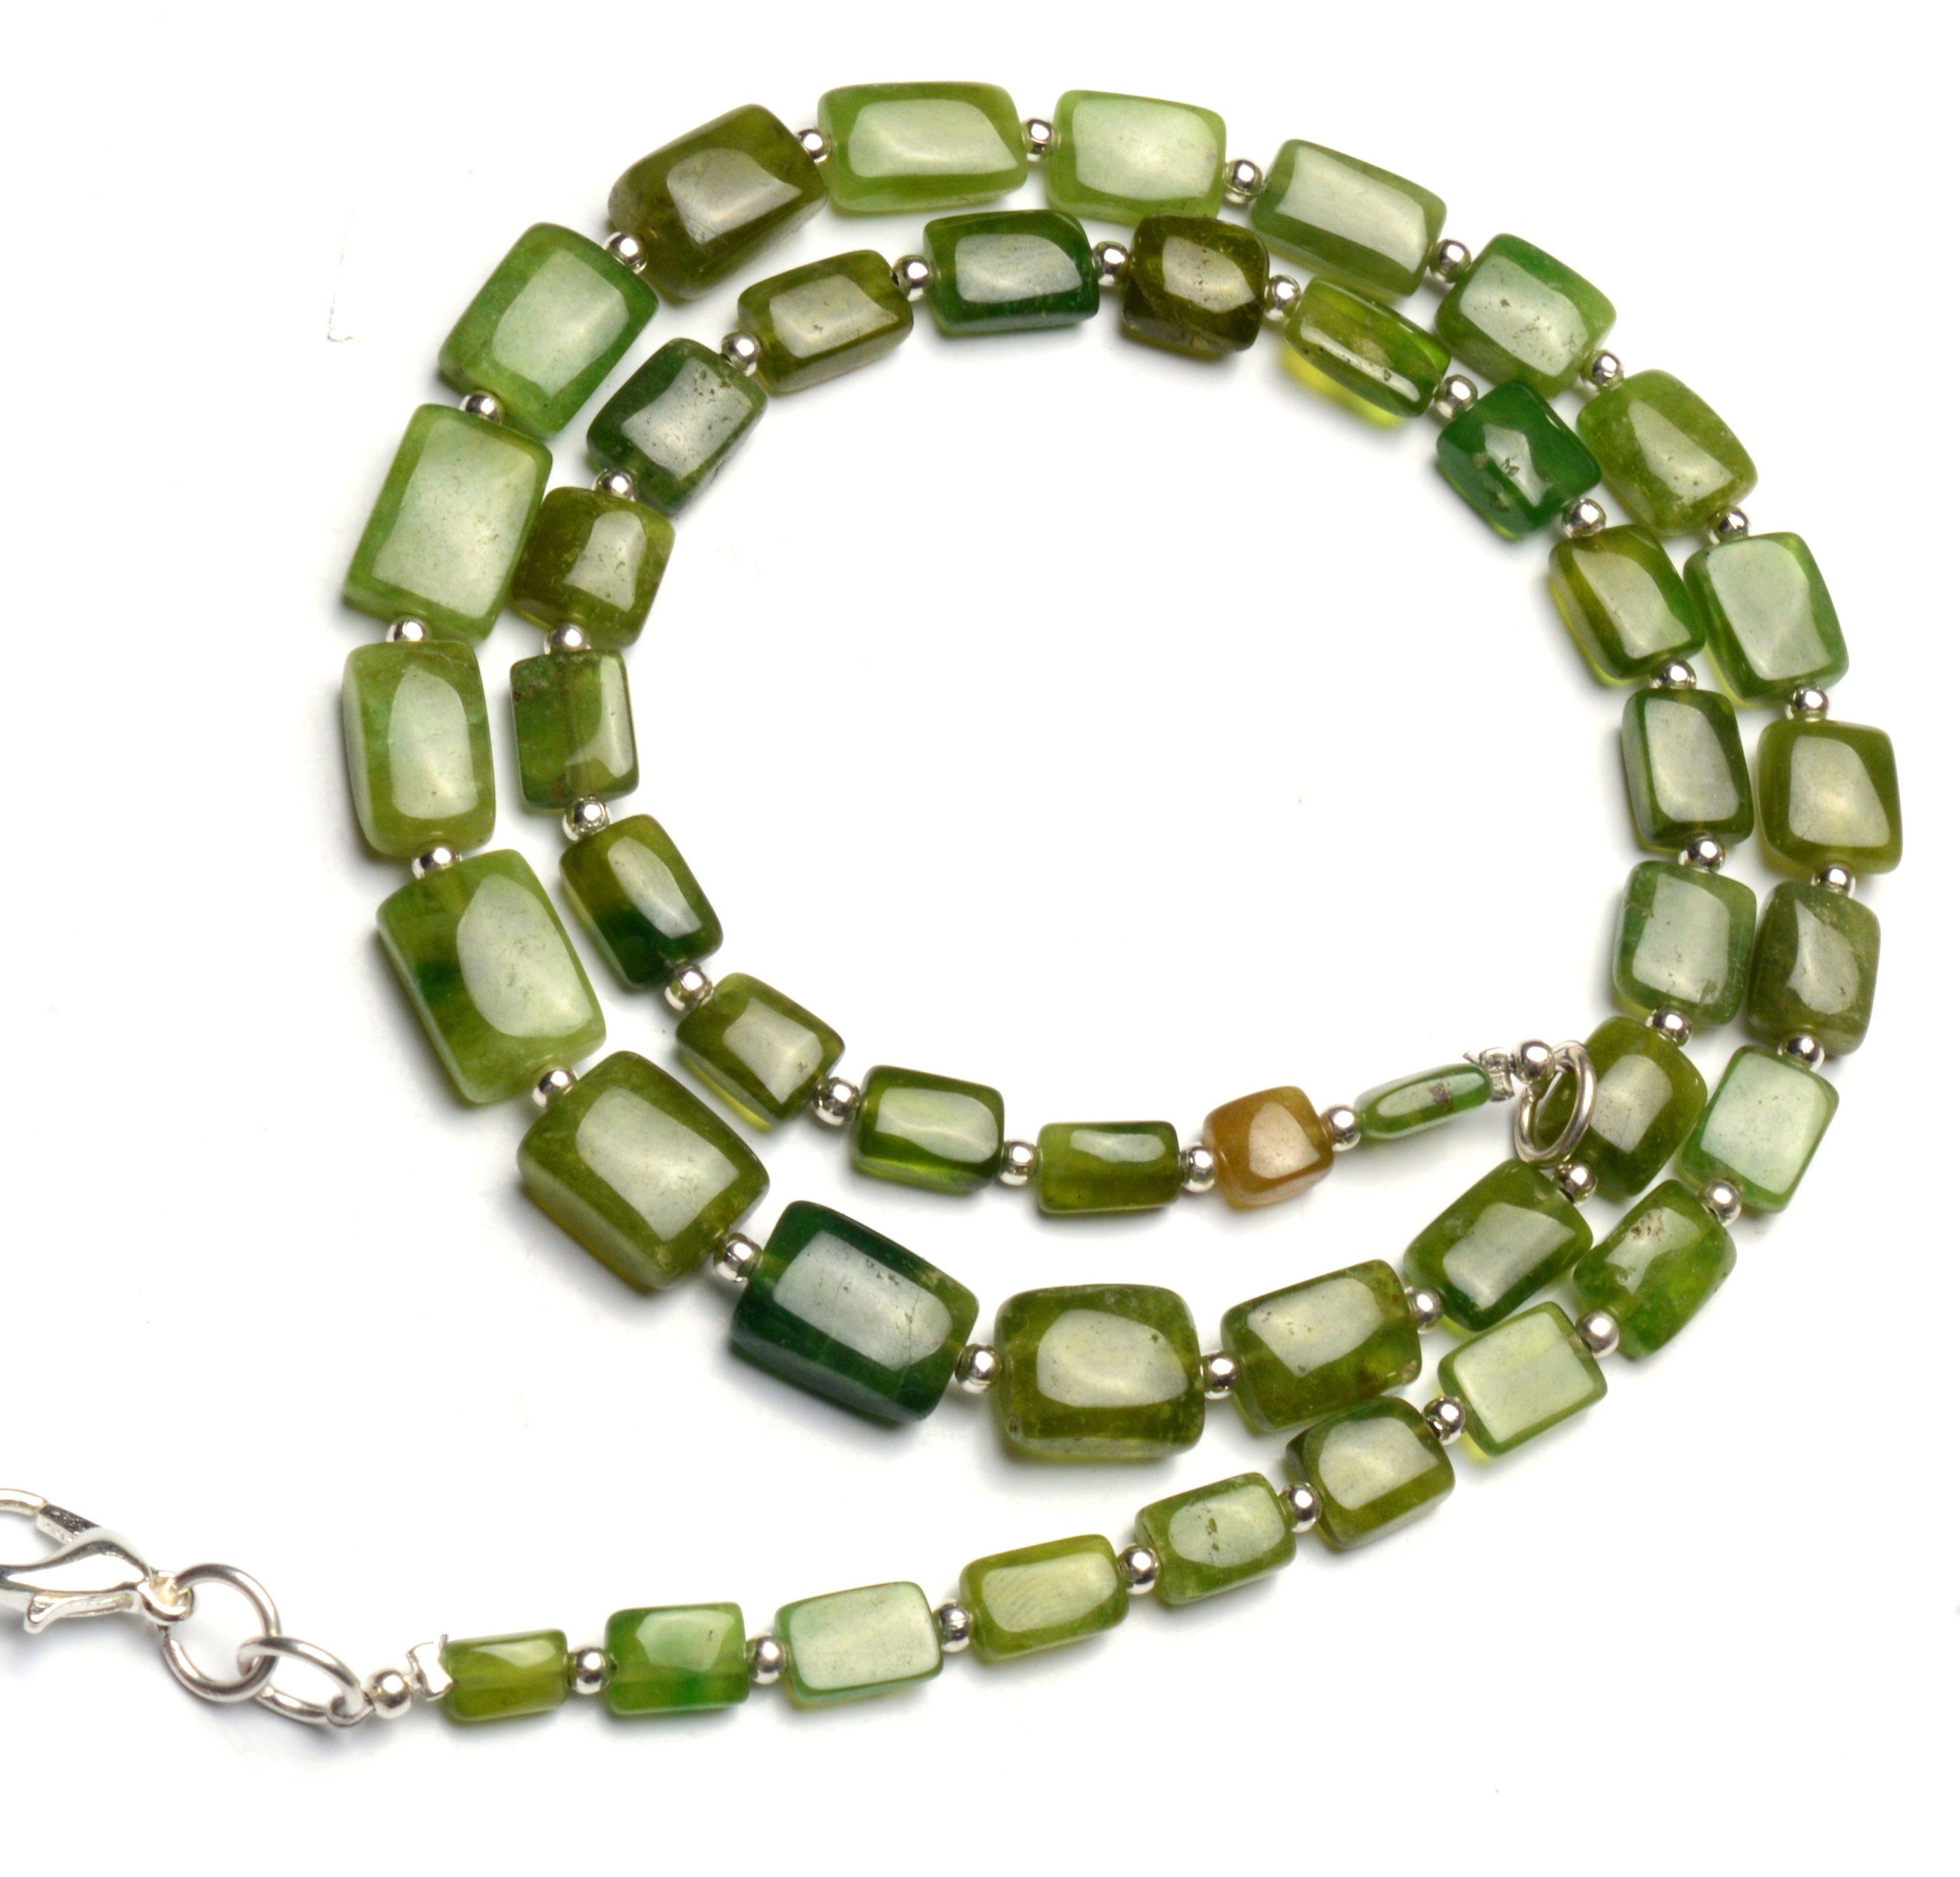 Rough Unpolished Peridot Gem Beads Necklace 8 to 18 mm Size Nuggets 20  Length